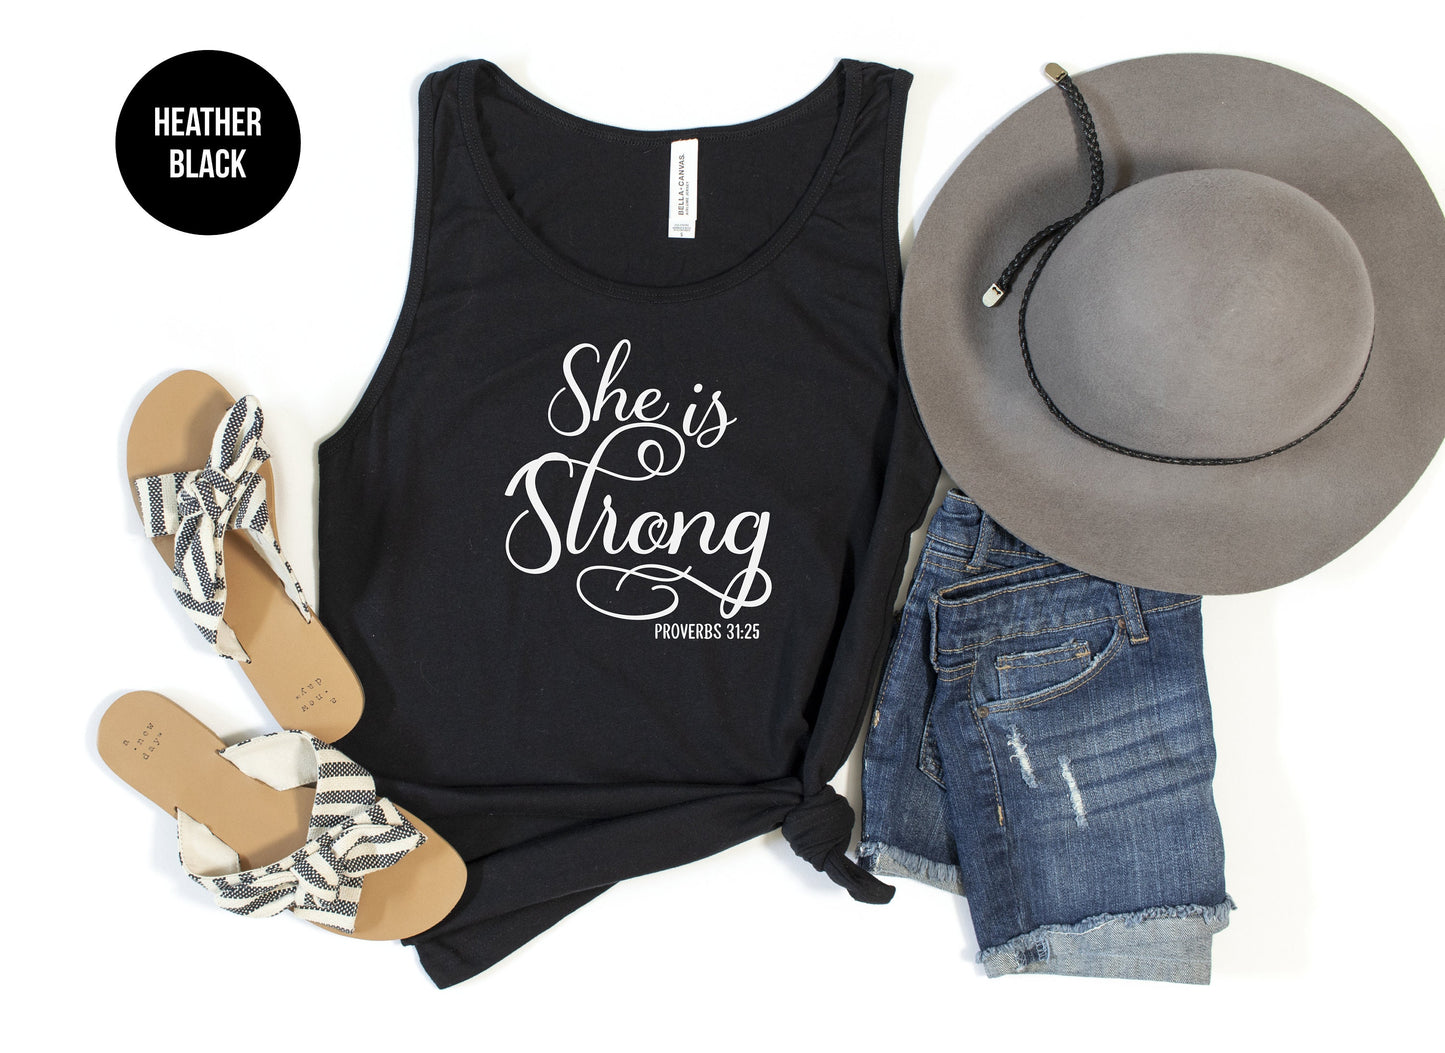 She is Strong - Proverbs 31:25 Tank Top